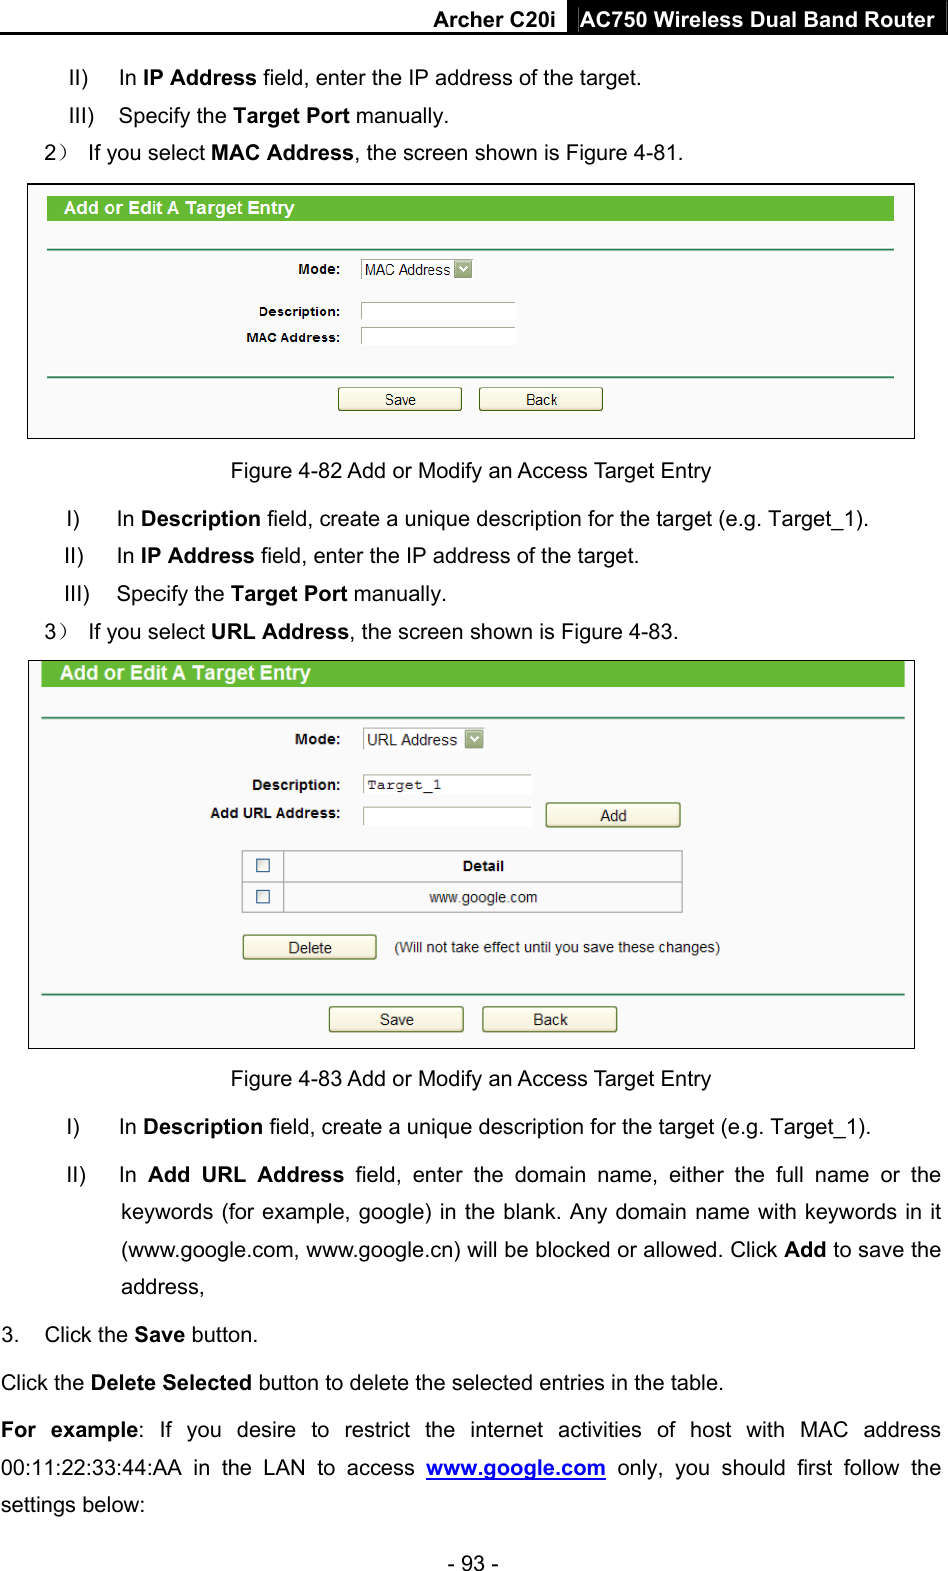 Archer C20i AC750 Wireless Dual Band Router - 93 - II) In IP Address field, enter the IP address of the target. III) Specify the Target Port manually. 2）  If you select MAC Address, the screen shown is Figure 4-81.   Figure 4-82 Add or Modify an Access Target Entry I) In Description field, create a unique description for the target (e.g. Target_1). II) In IP Address field, enter the IP address of the target. III) Specify the Target Port manually. 3）  If you select URL Address, the screen shown is Figure 4-83.  Figure 4-83 Add or Modify an Access Target Entry I) In Description field, create a unique description for the target (e.g. Target_1). II) In Add URL Address field, enter the domain name, either the full name or the keywords (for example, google) in the blank. Any domain name with keywords in it (www.google.com, www.google.cn) will be blocked or allowed. Click Add to save the address, 3. Click the Save button. Click the Delete Selected button to delete the selected entries in the table. For example: If you desire to restrict the internet activities of host with MAC address 00:11:22:33:44:AA in the LAN to access www.google.com only, you should first follow the settings below: 